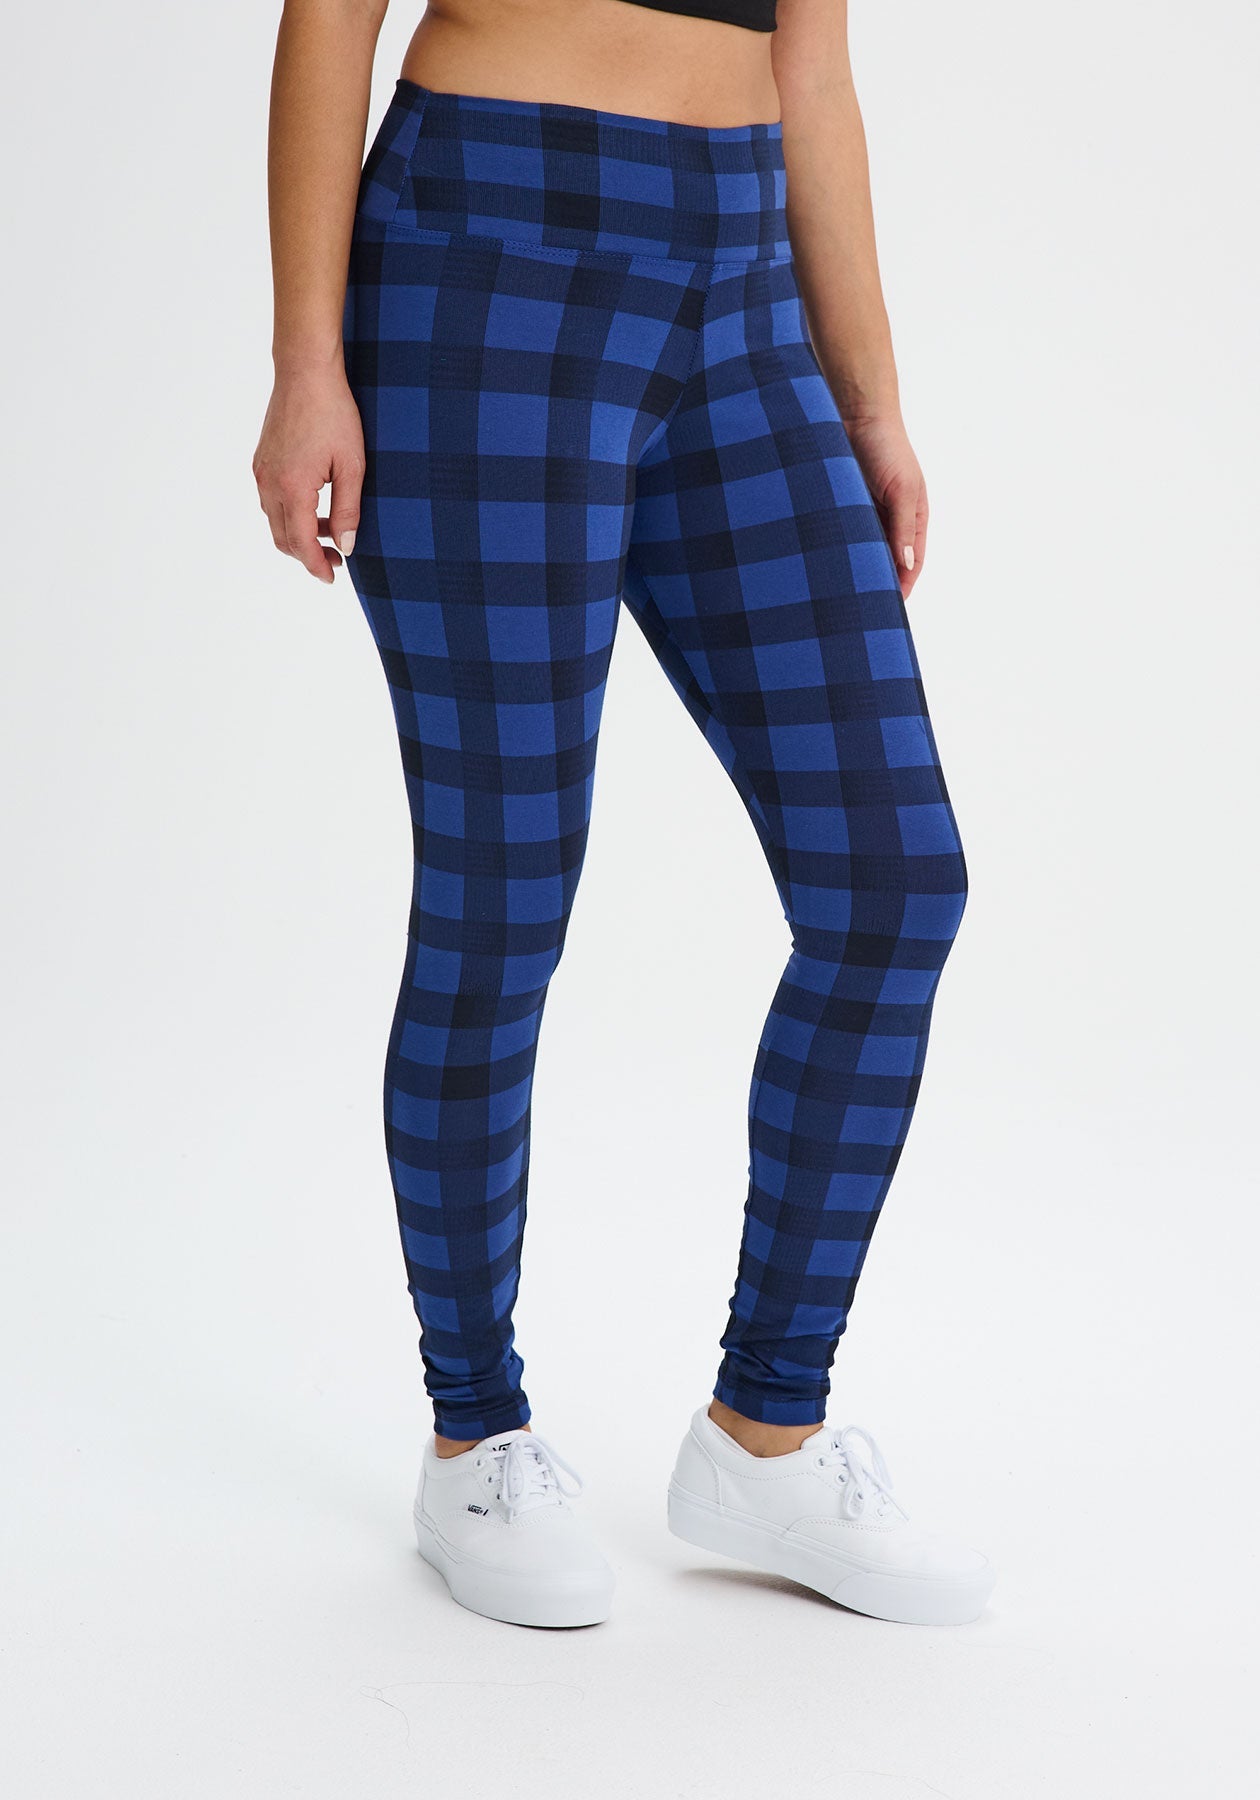 INC International Concepts Plaid Leggings, Created for Macy's - ShopStyle